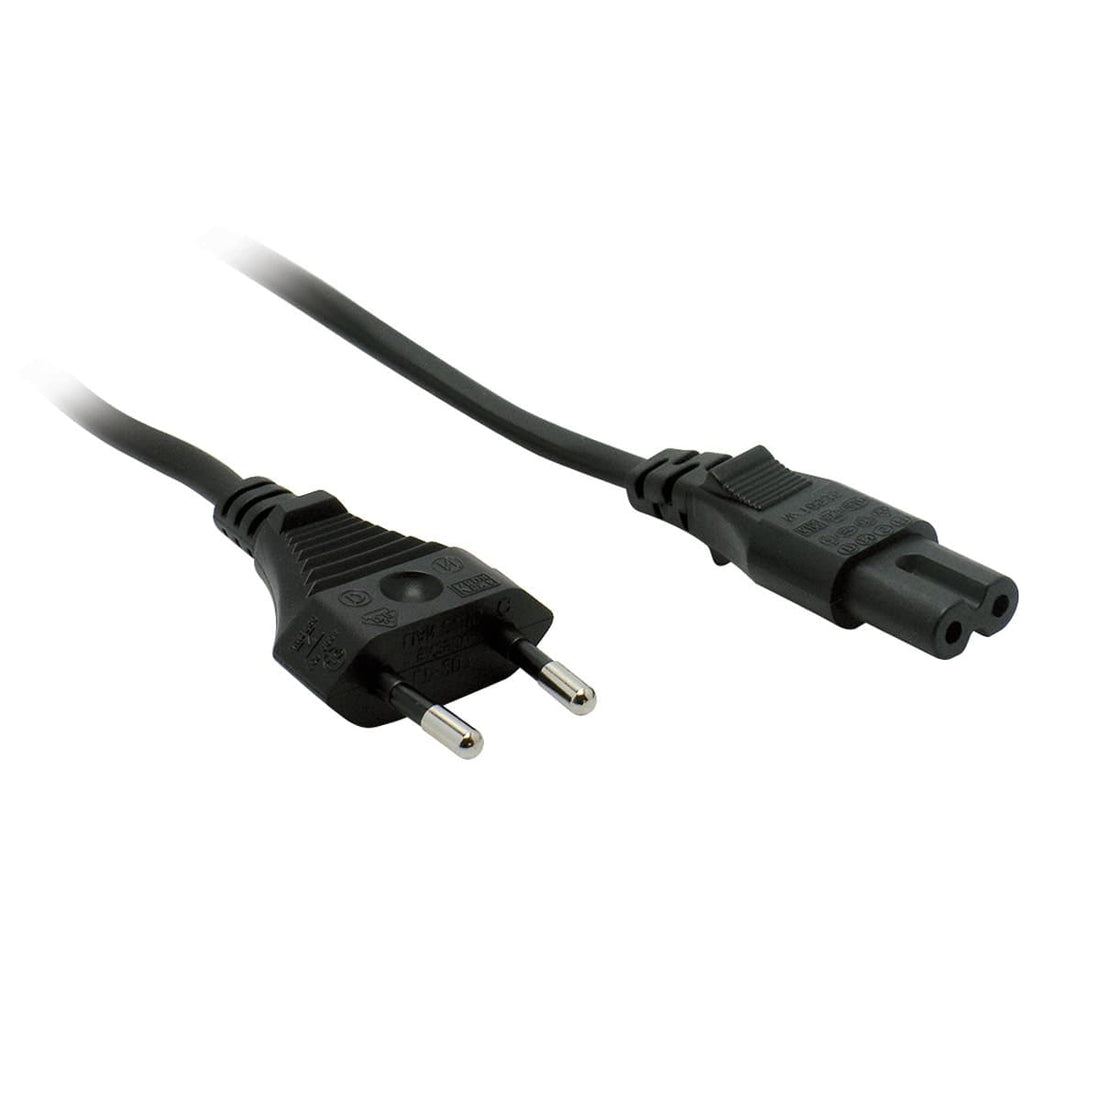 POWER CABLE 1.5MT - best price from Maltashopper.com BR420992295